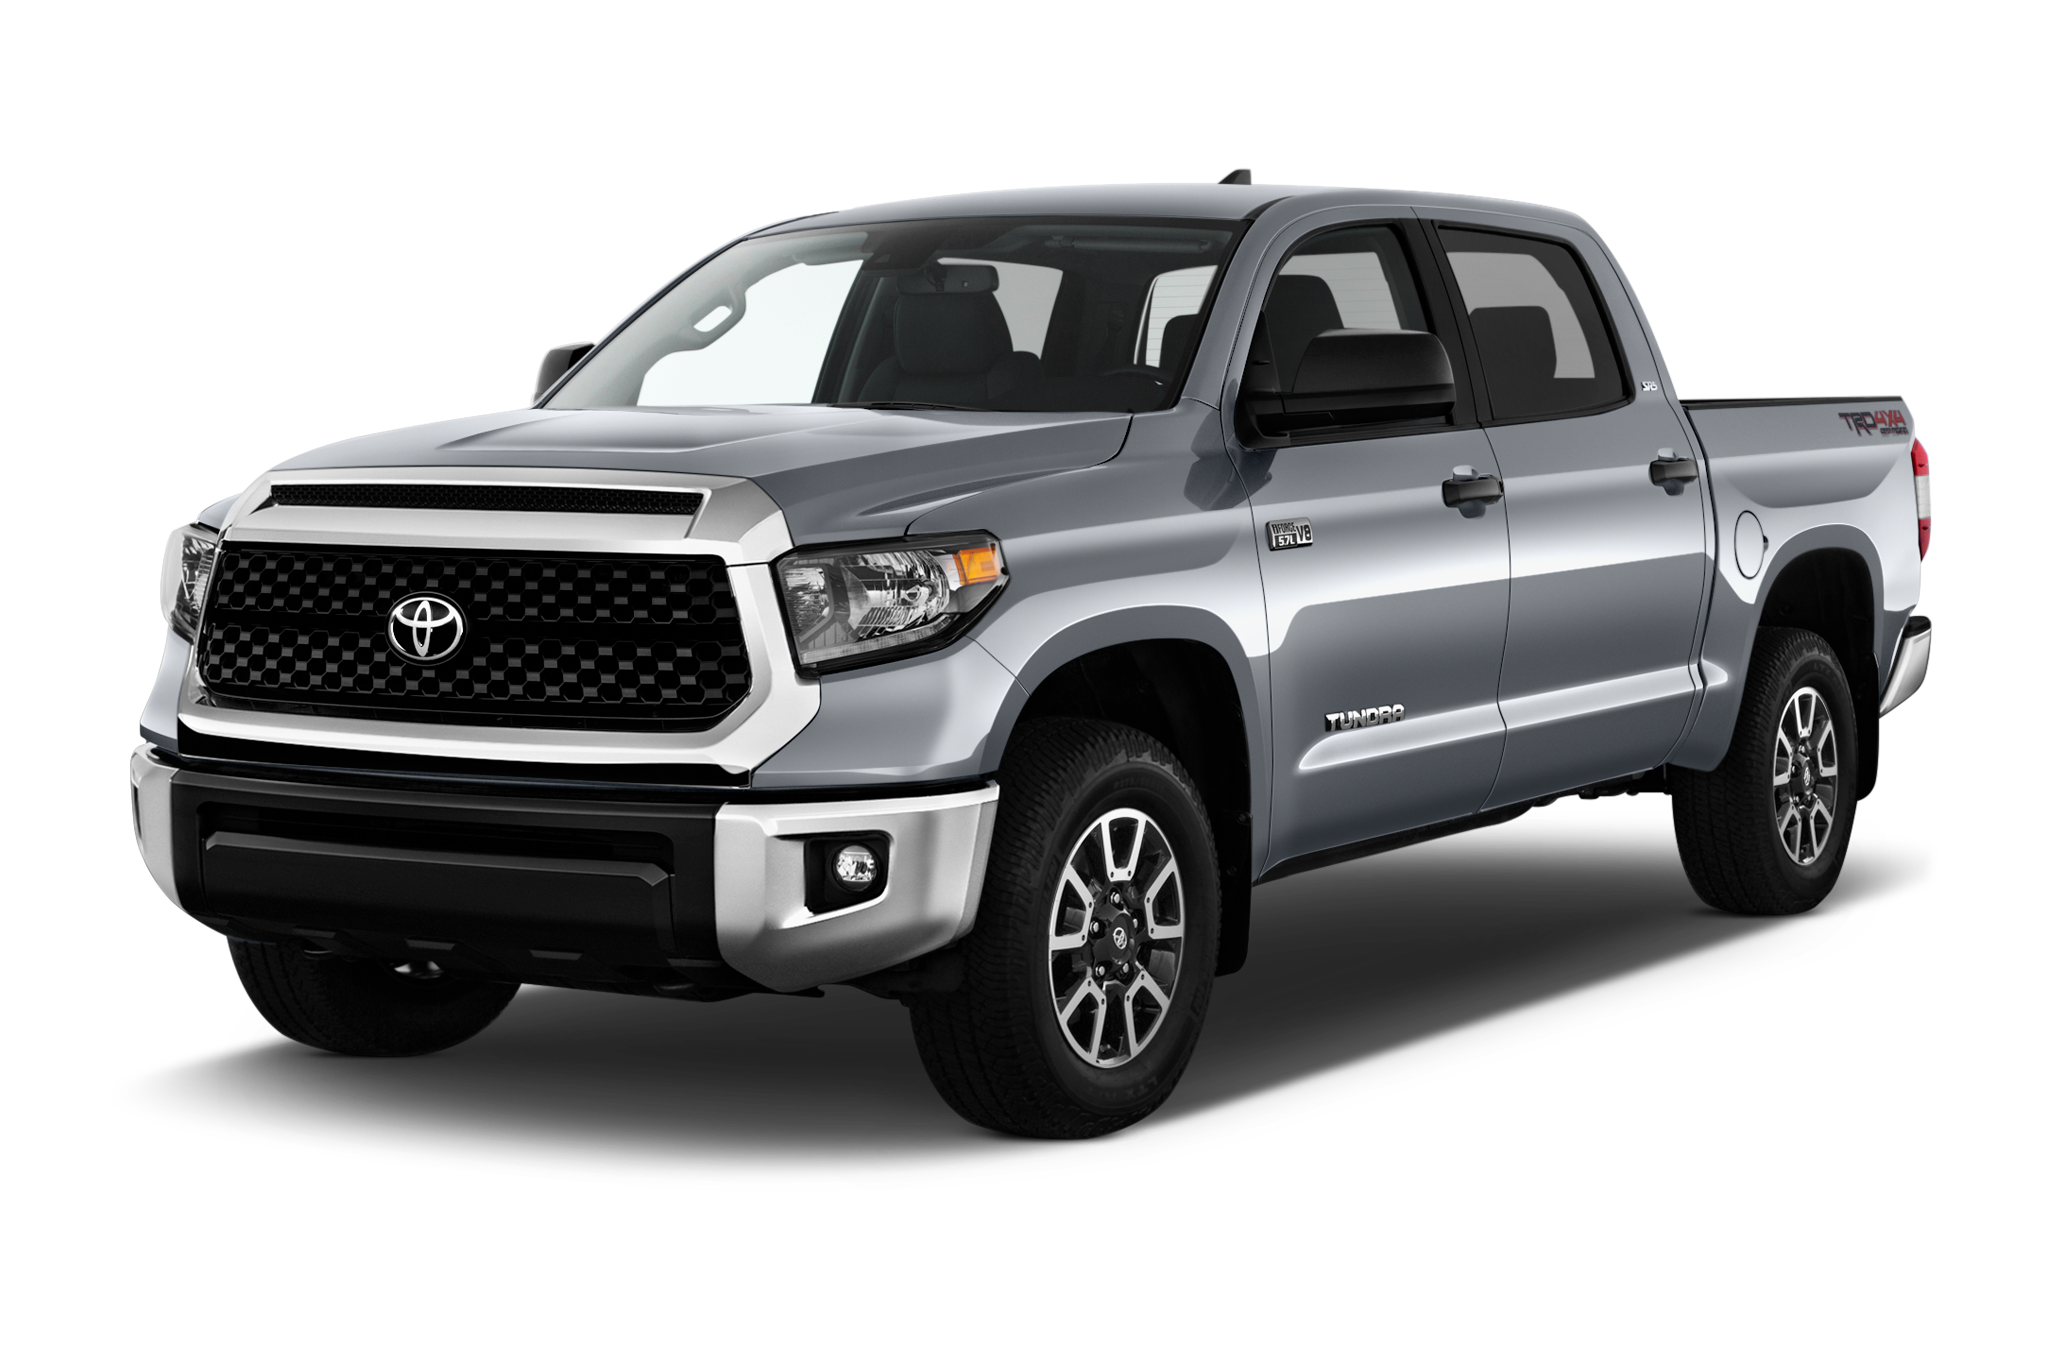 2021 Toyota Tundra 4x4 CrewMax SR5 5.7 Specs and features - MSN Autos